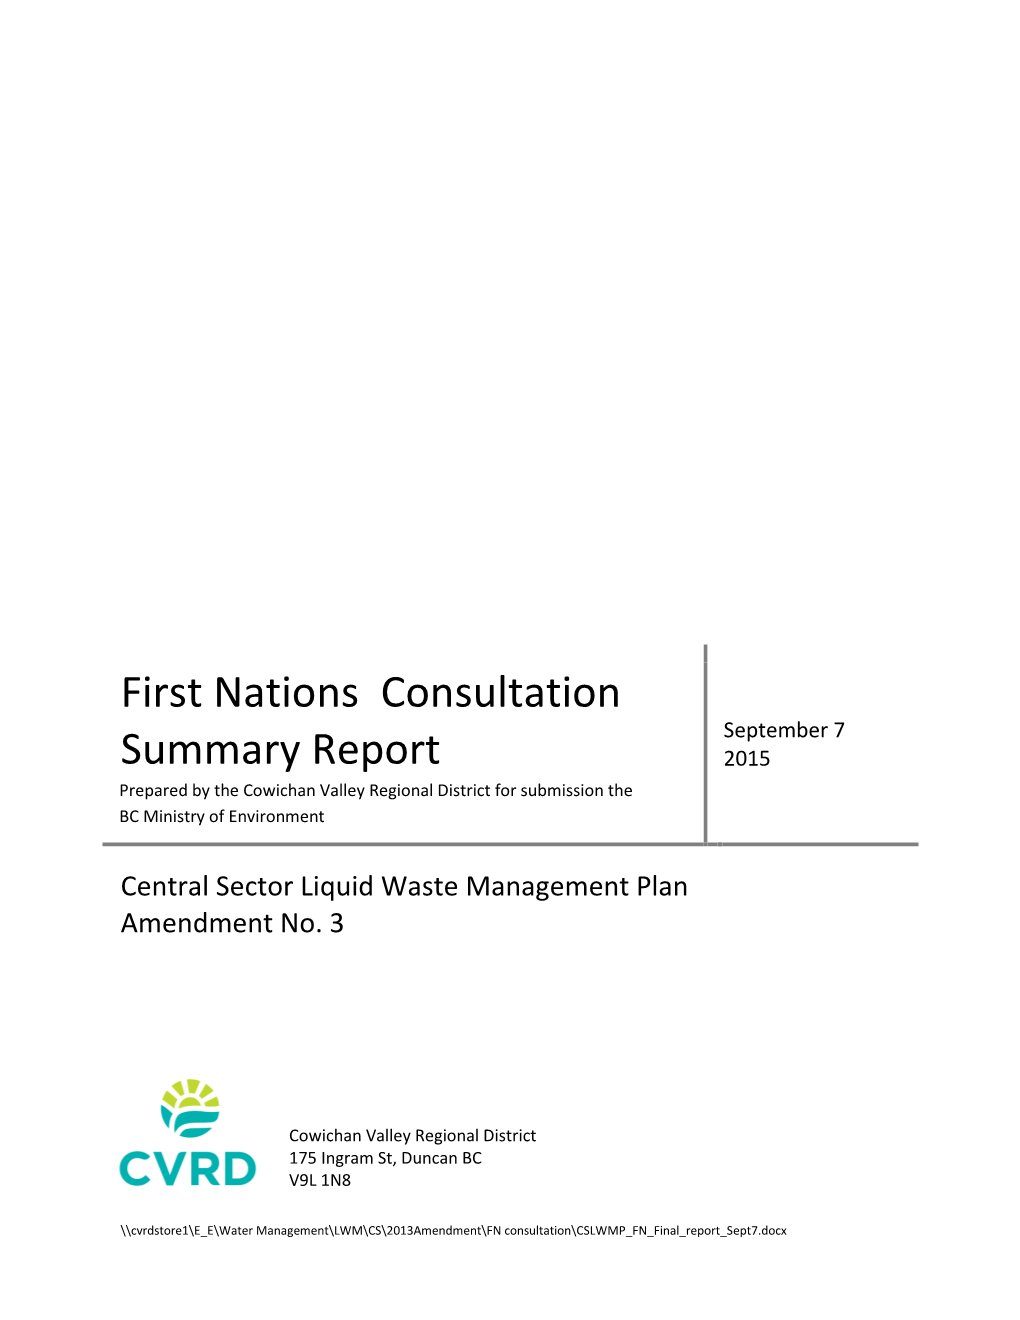 First Nations Consultation Summary Report